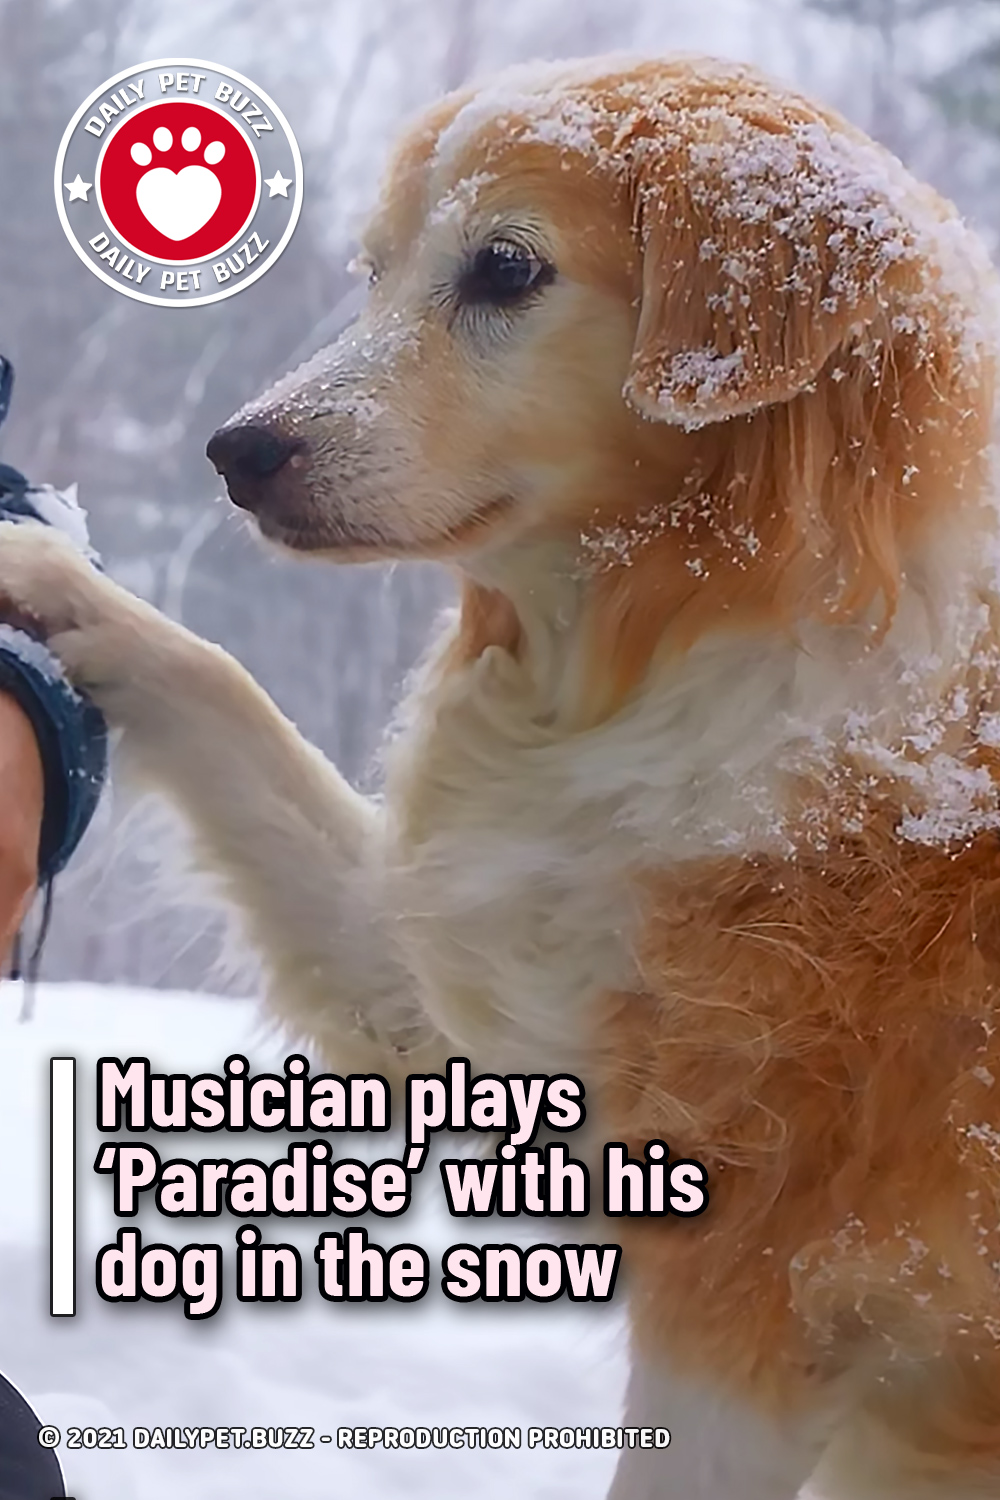 Musician plays ‘Paradise’ with his dog in the snow